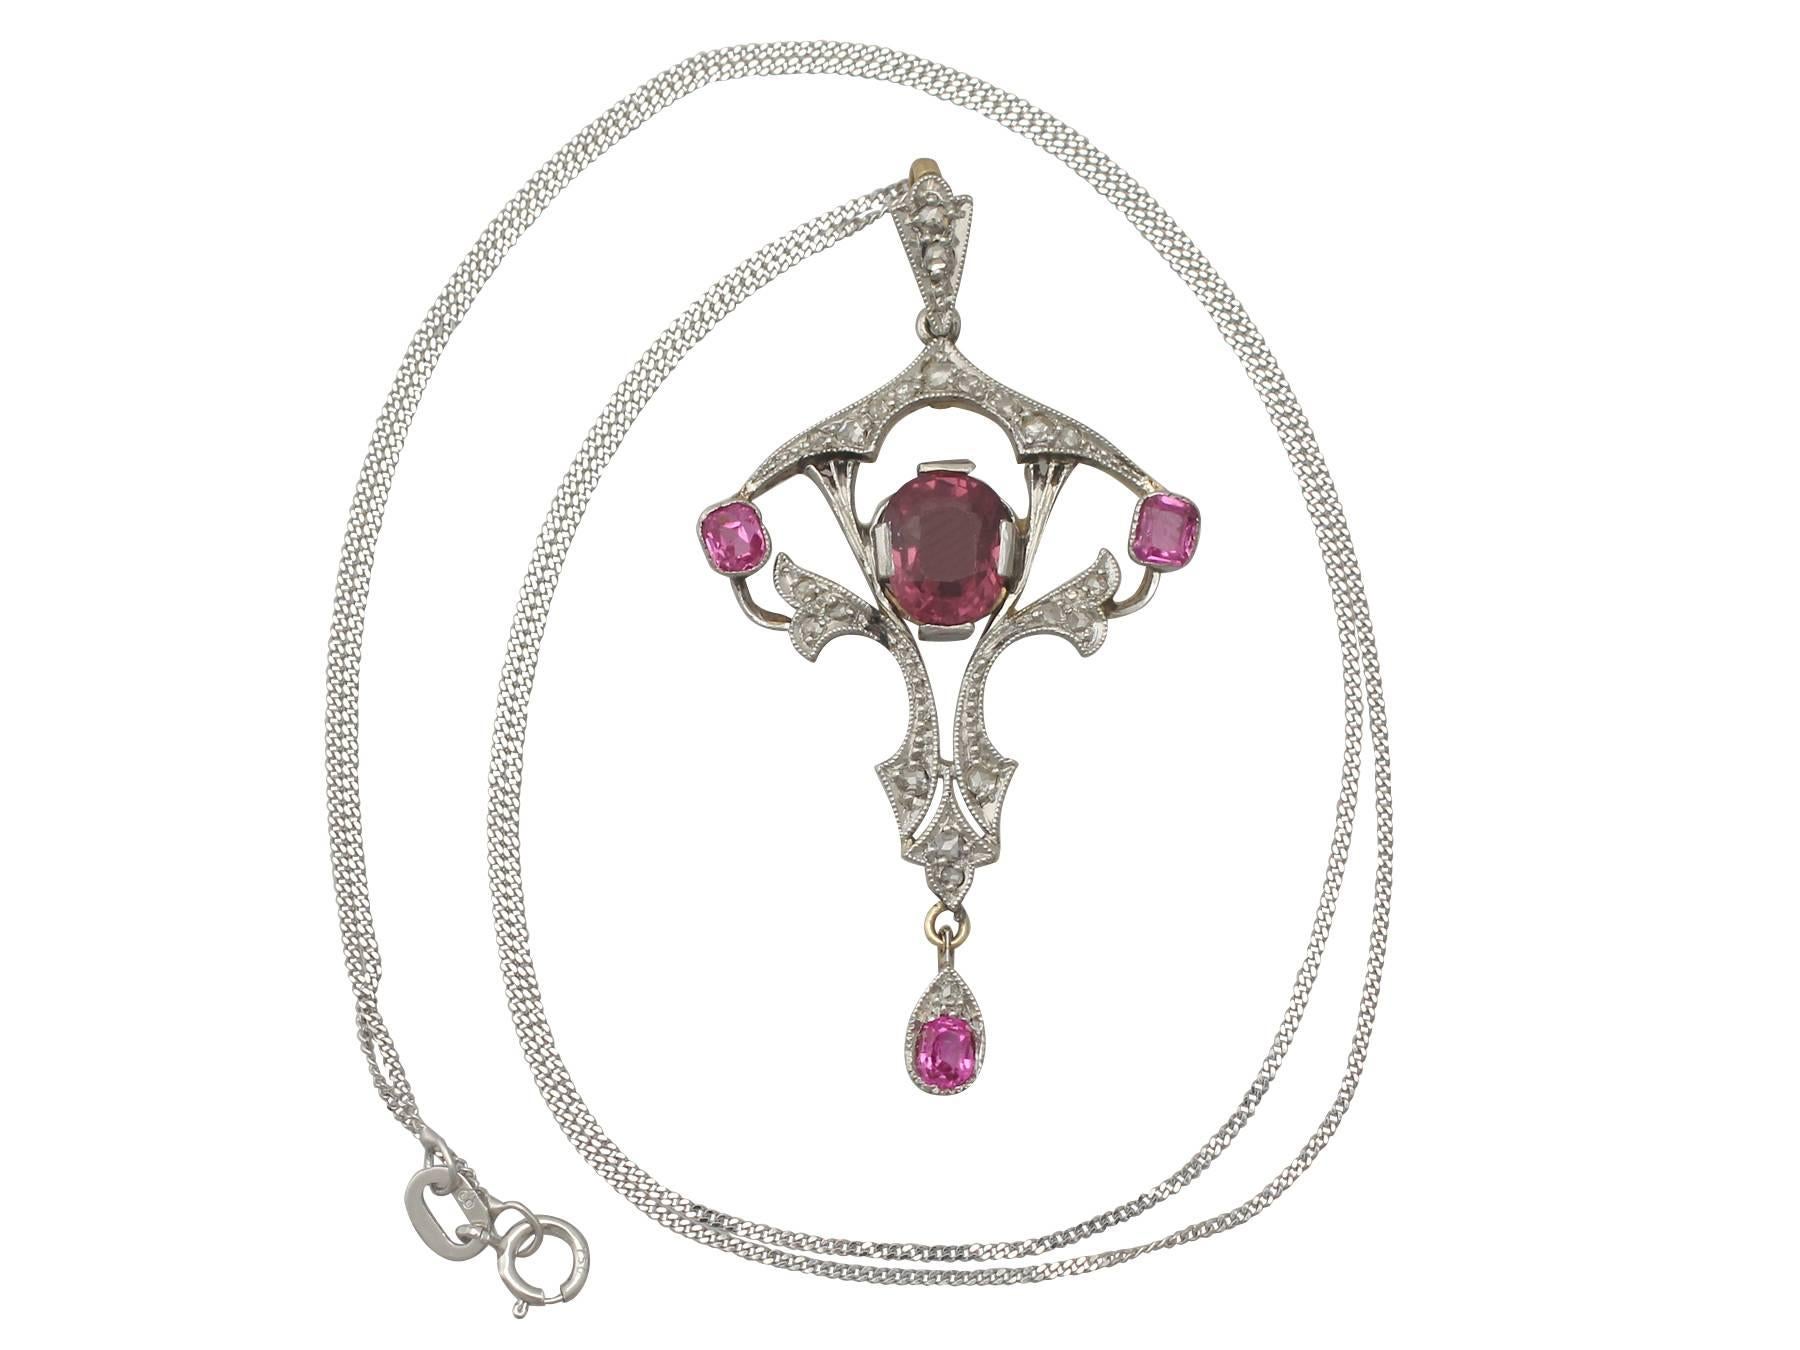 An exceptional, fine and impressive antique Belle Epoque 0.95 carat pink sapphire and 0.18 carat diamond, 18 karat yellow gold and platinum set pendant 

This exceptional, fine and impressive pink sapphire pendant has been crafted in 18k yellow